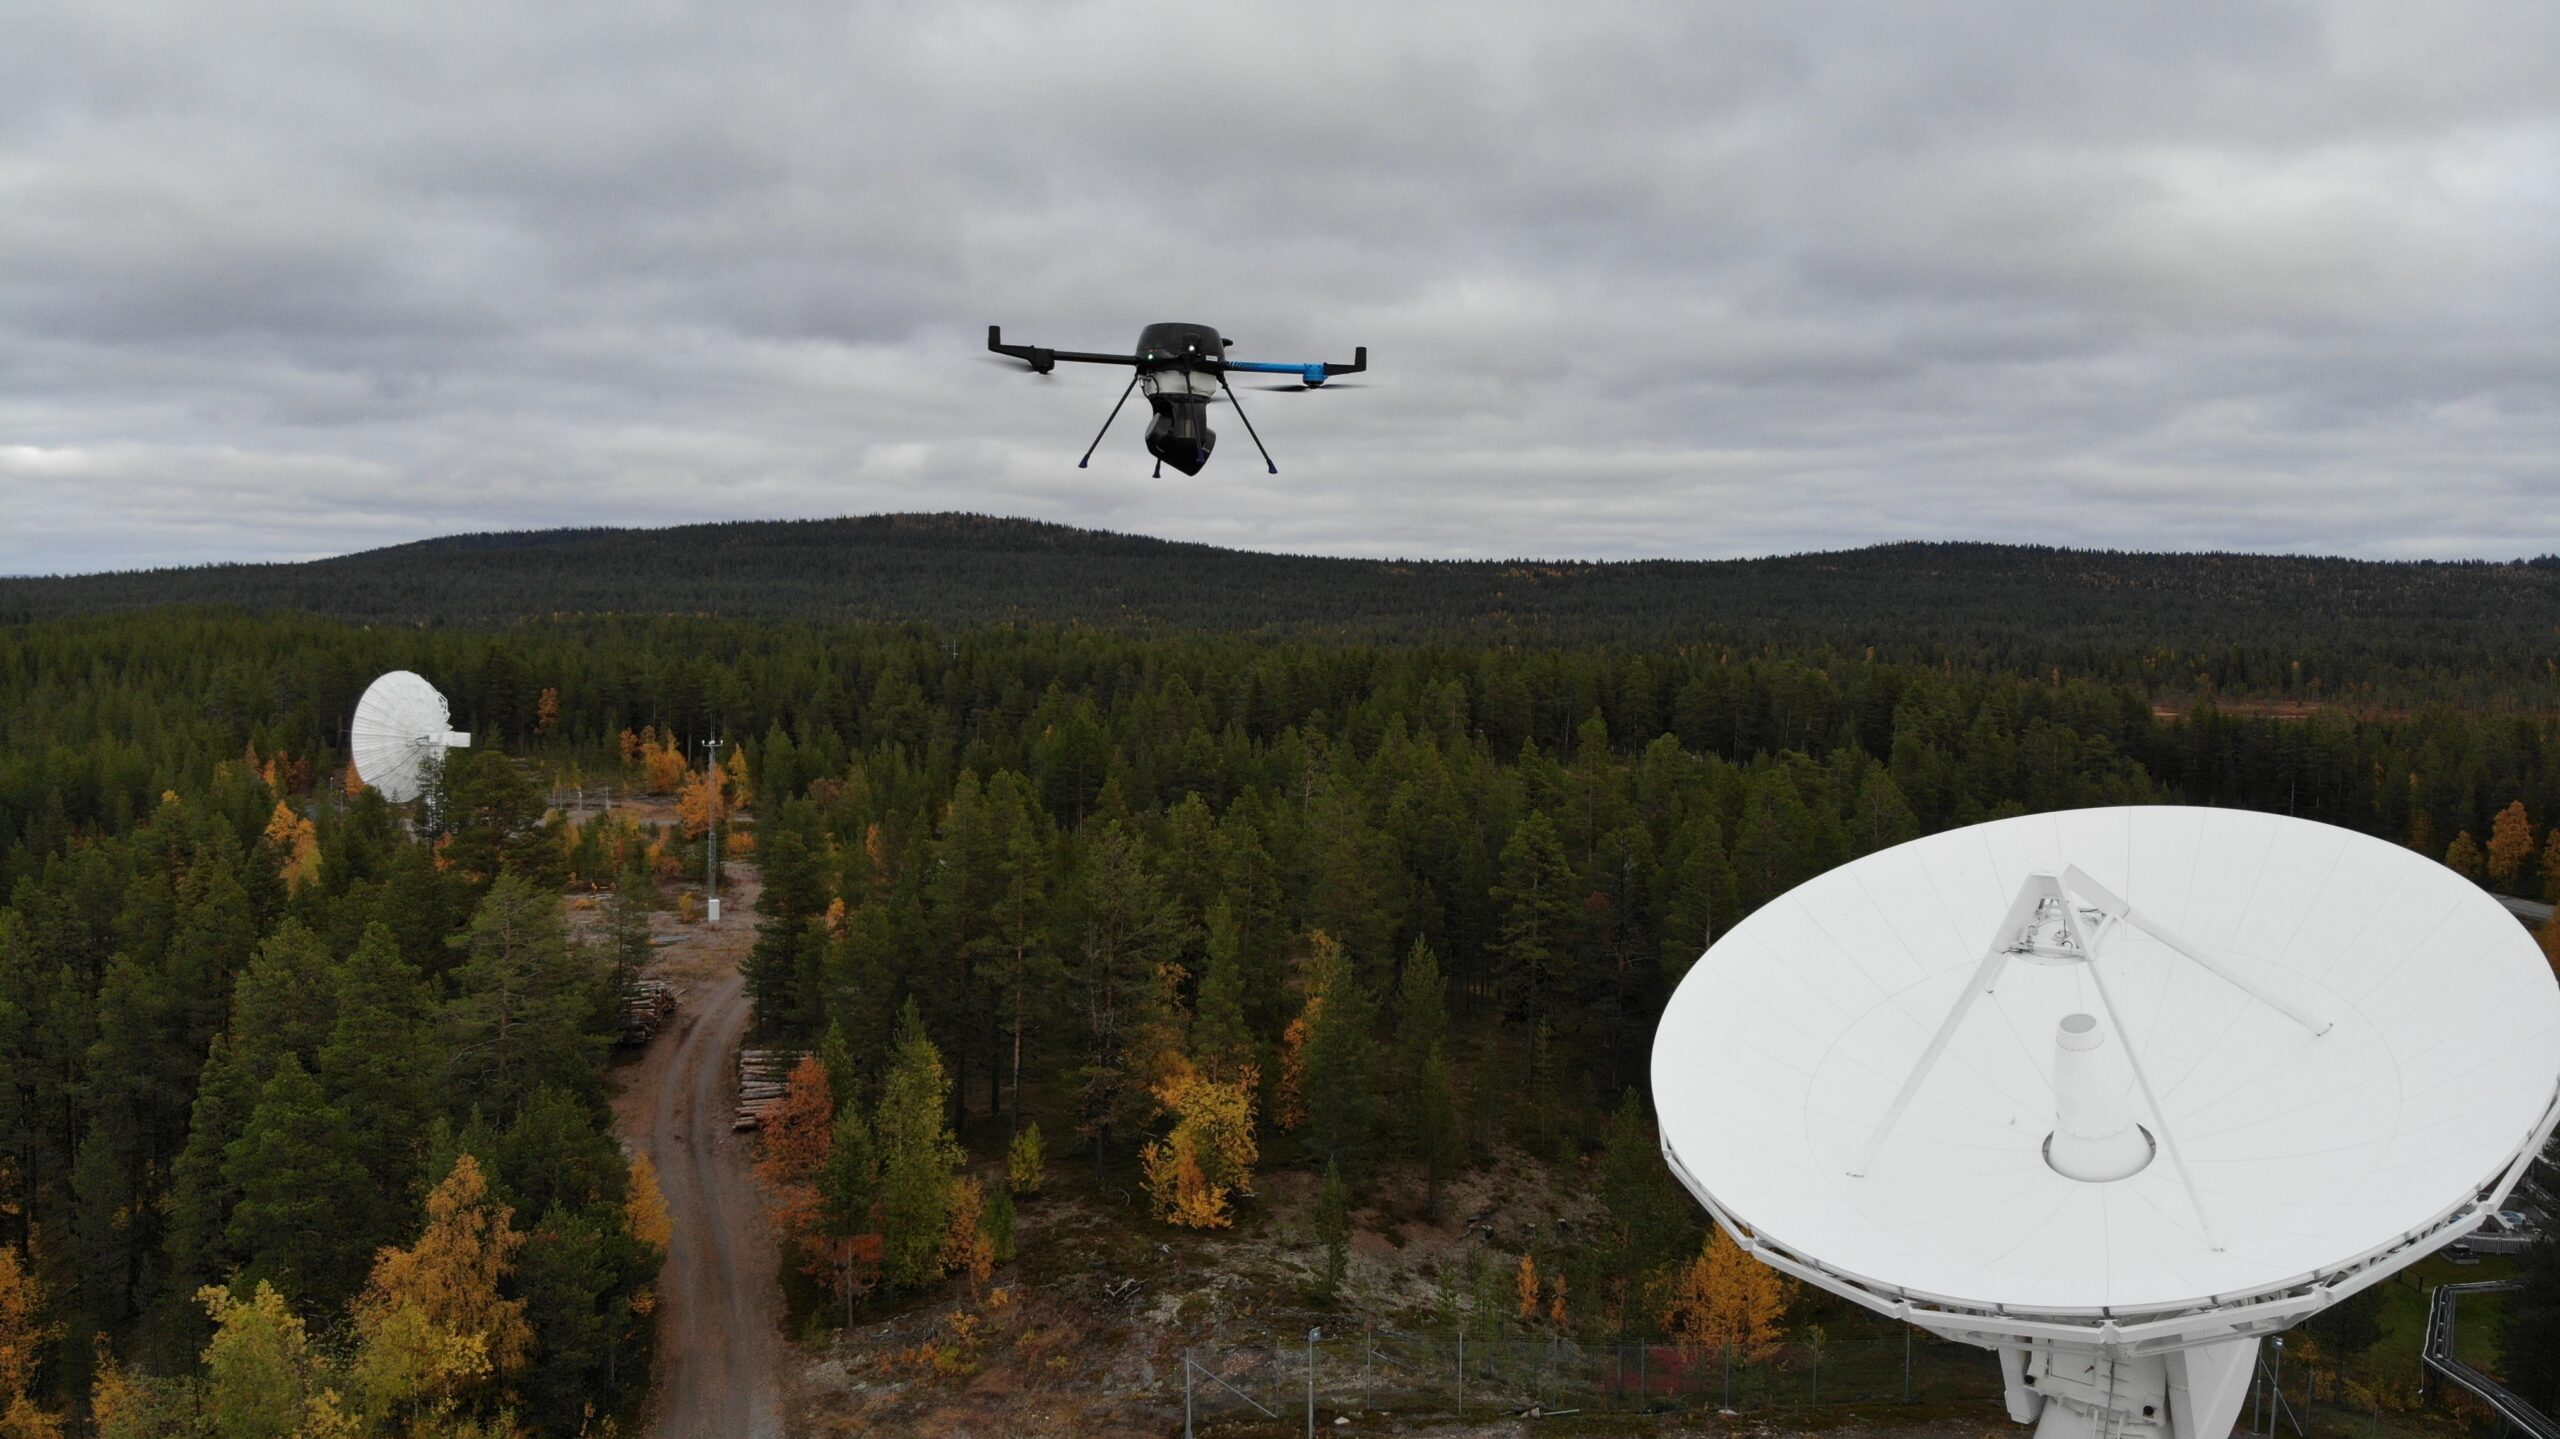 Large antenna drone test